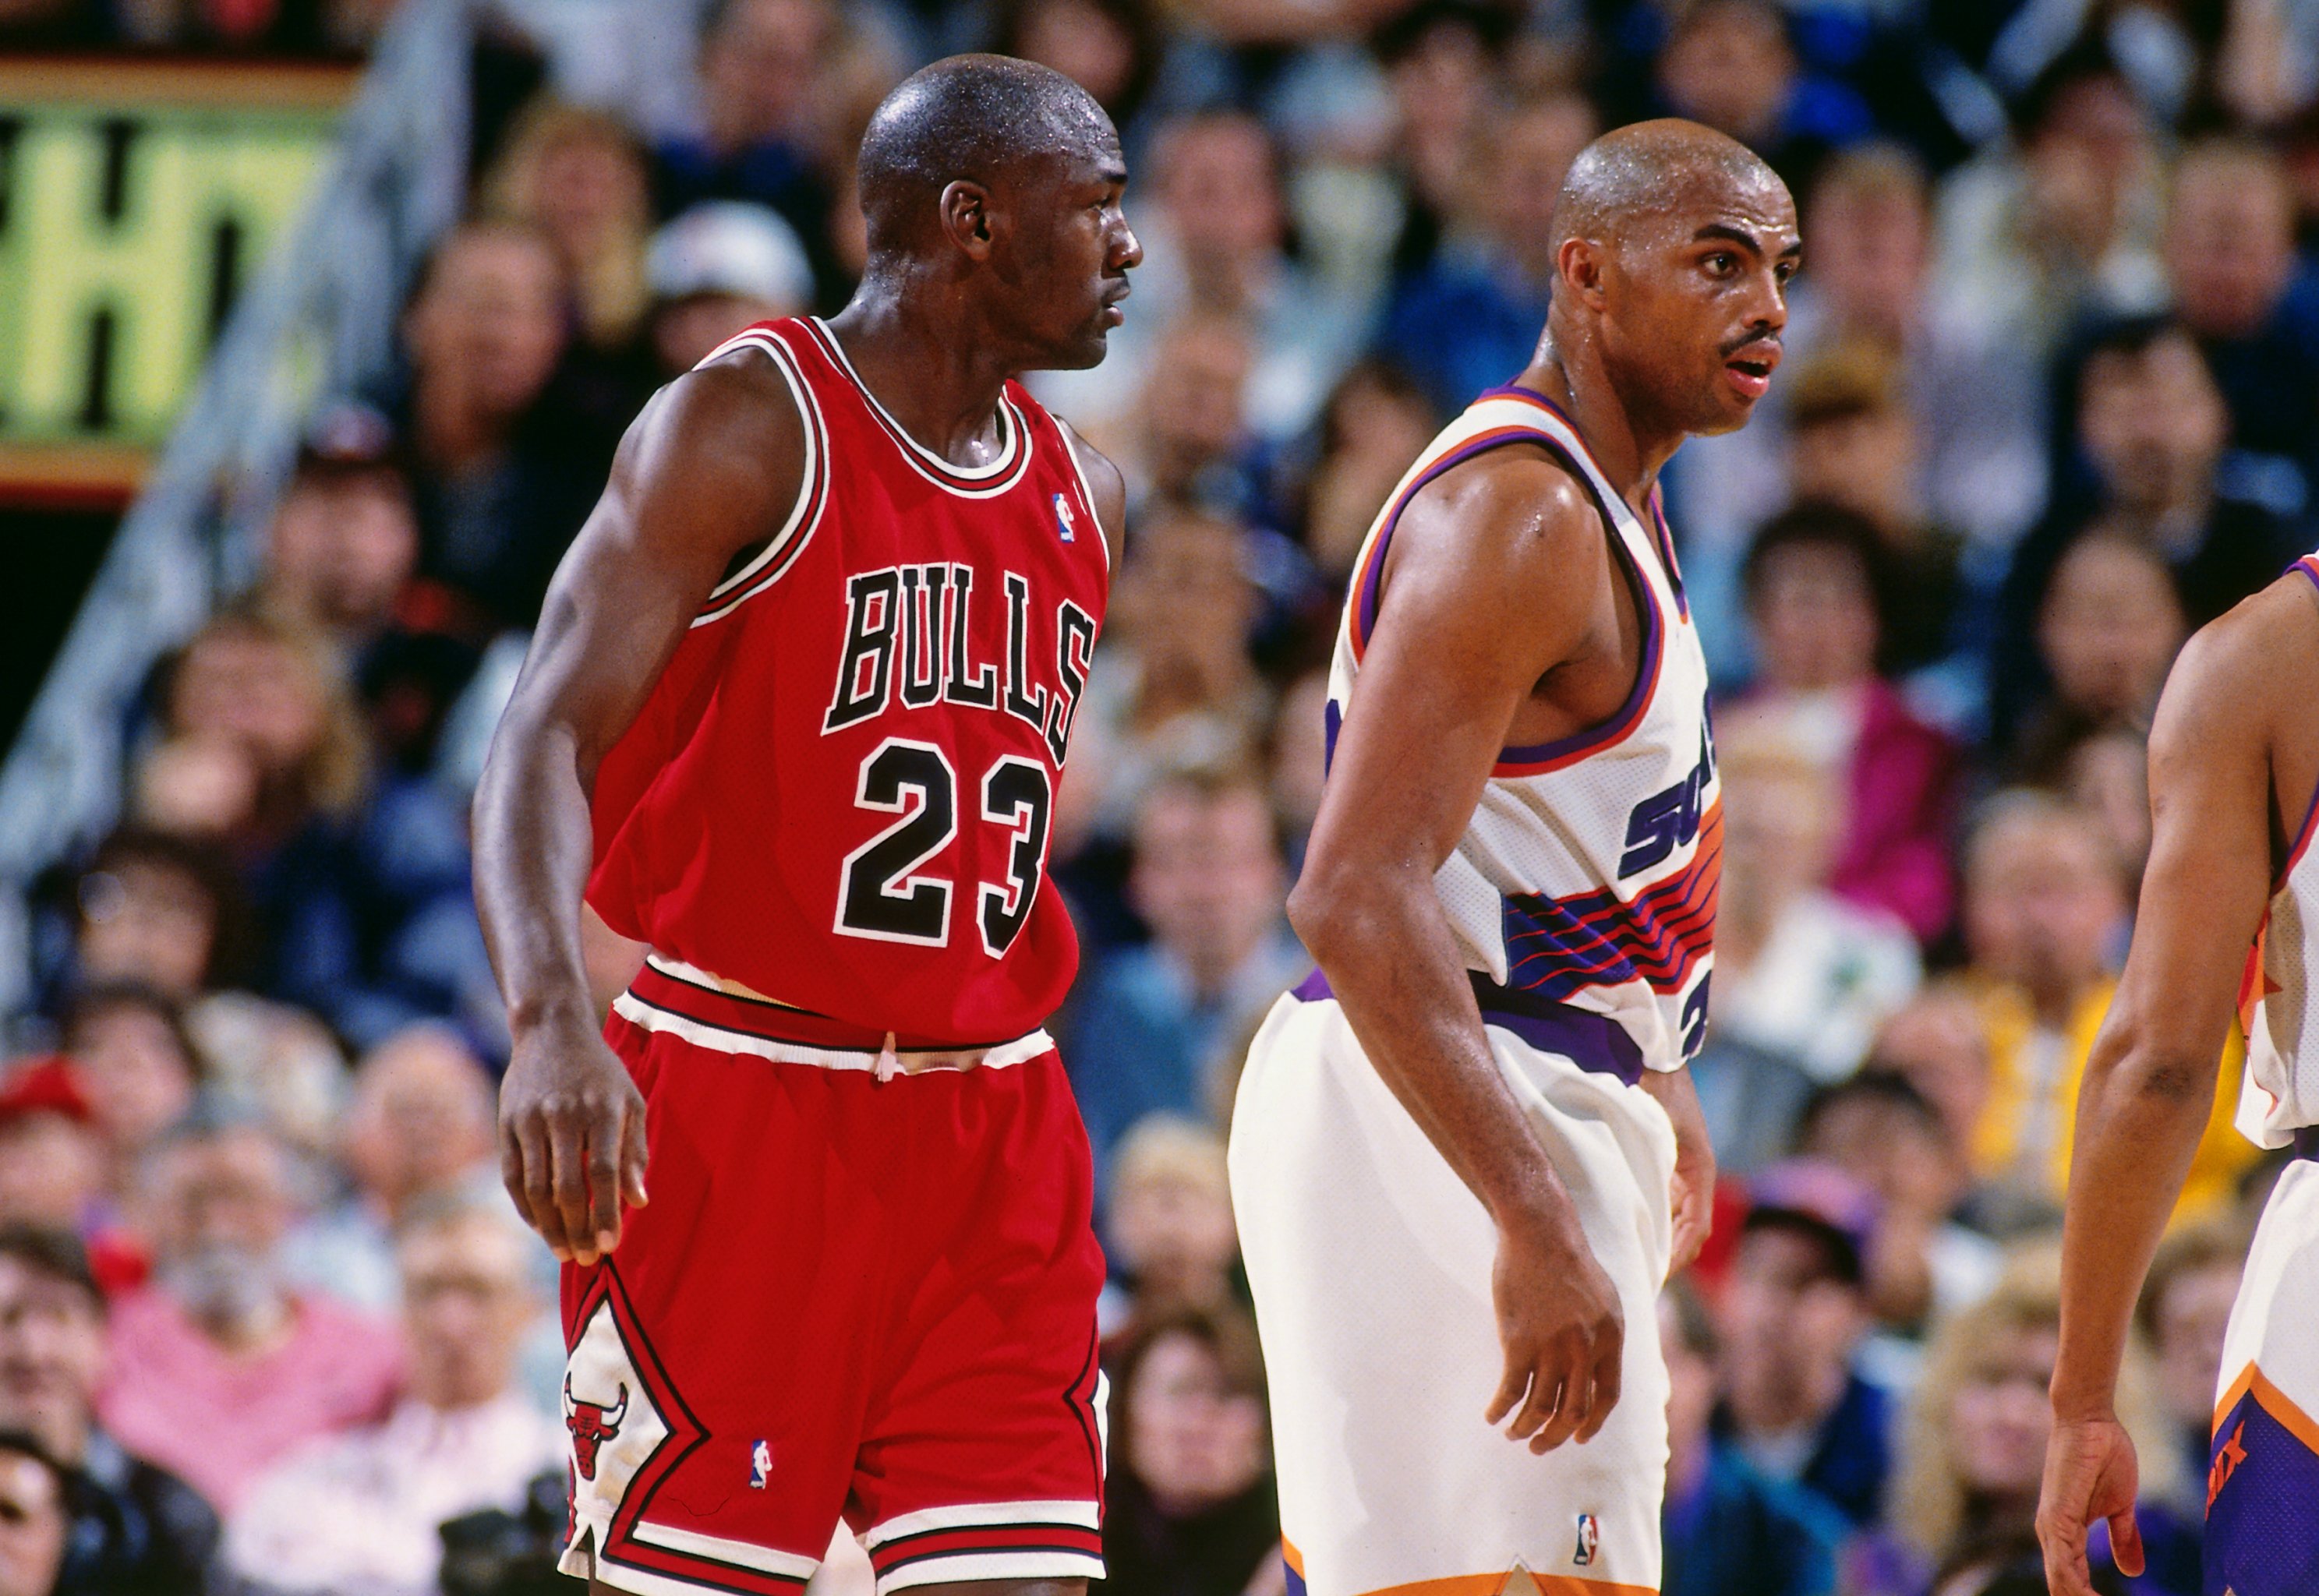 On this day in 1993, Michael Jordan dropped 64 points on Shaq and